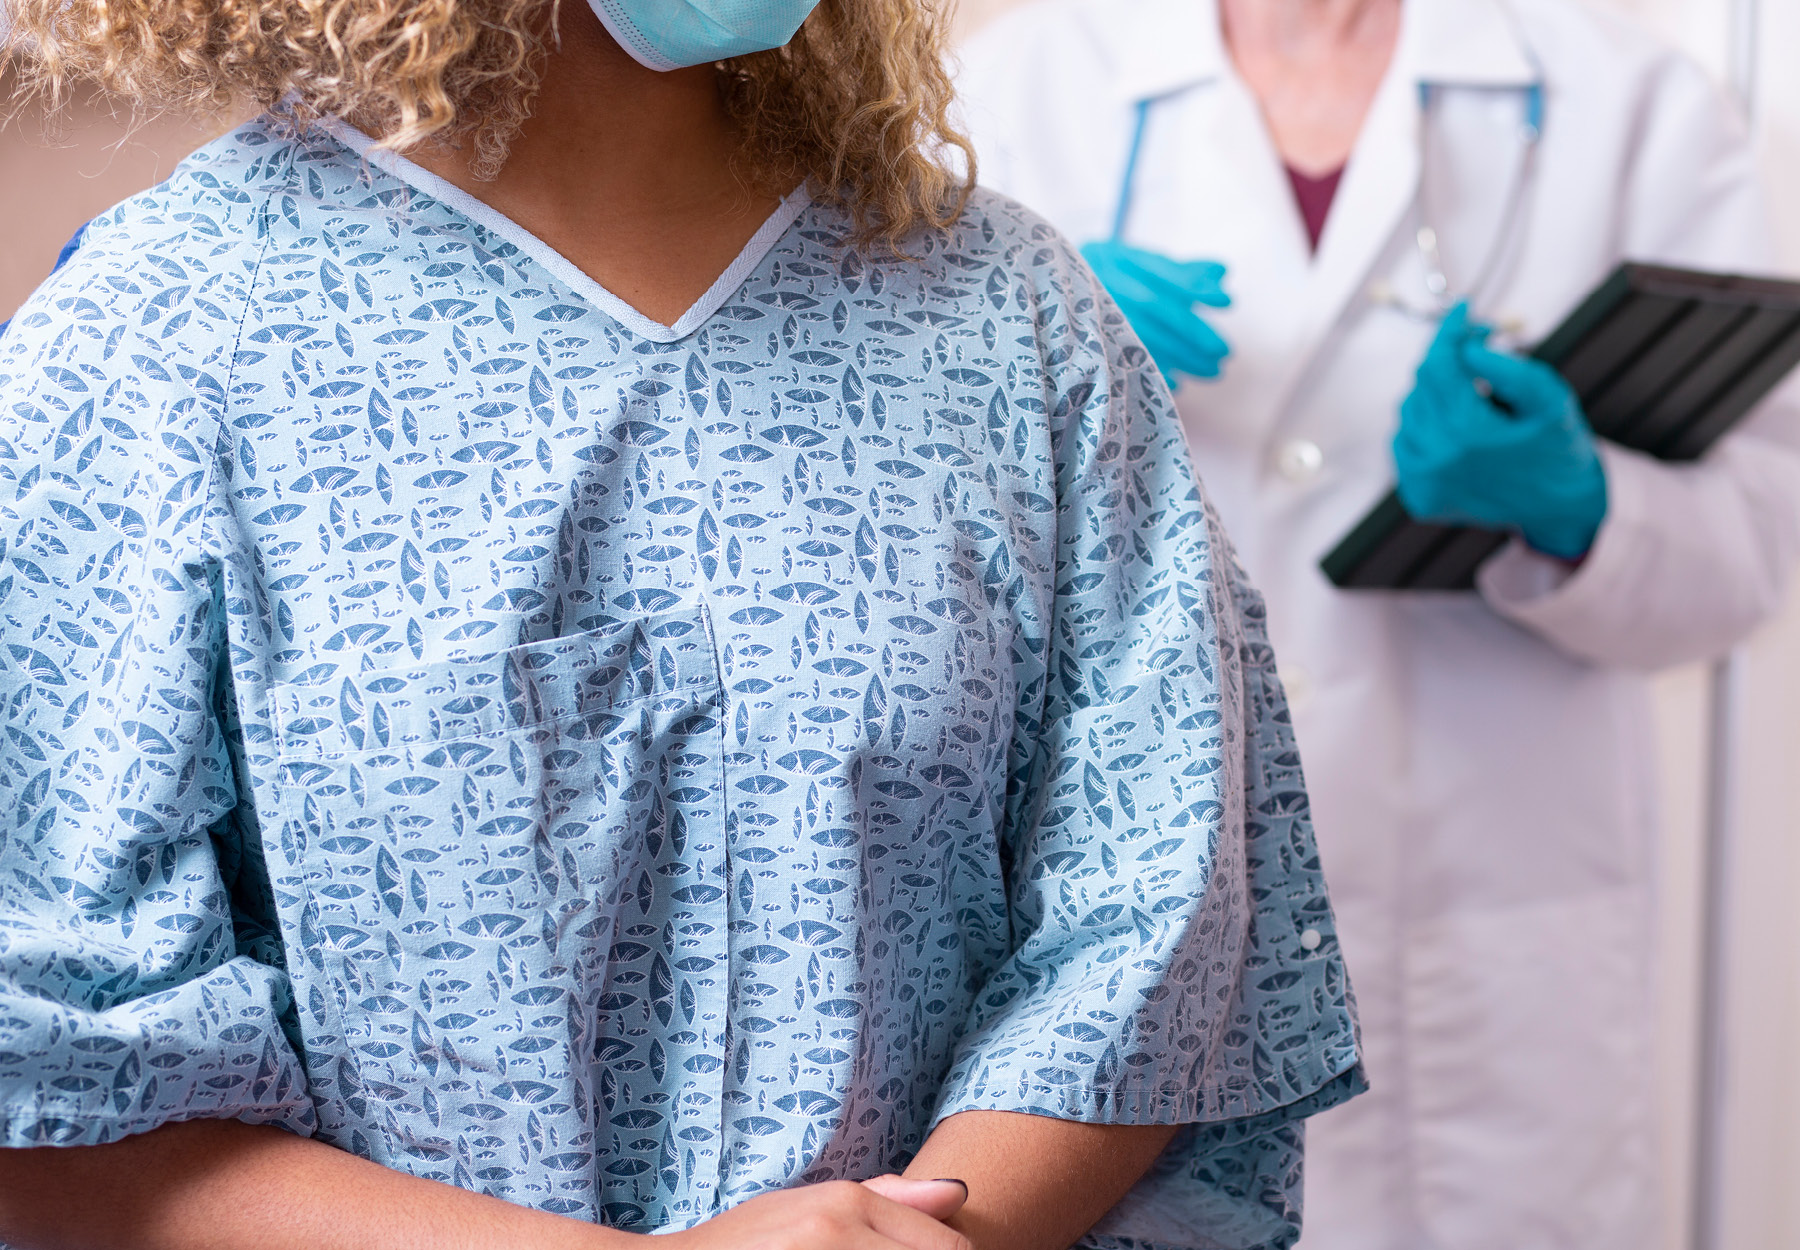 Closeup of female patient, who is getting ready for breast cancer screening, with a doctor in the background. iStock image.